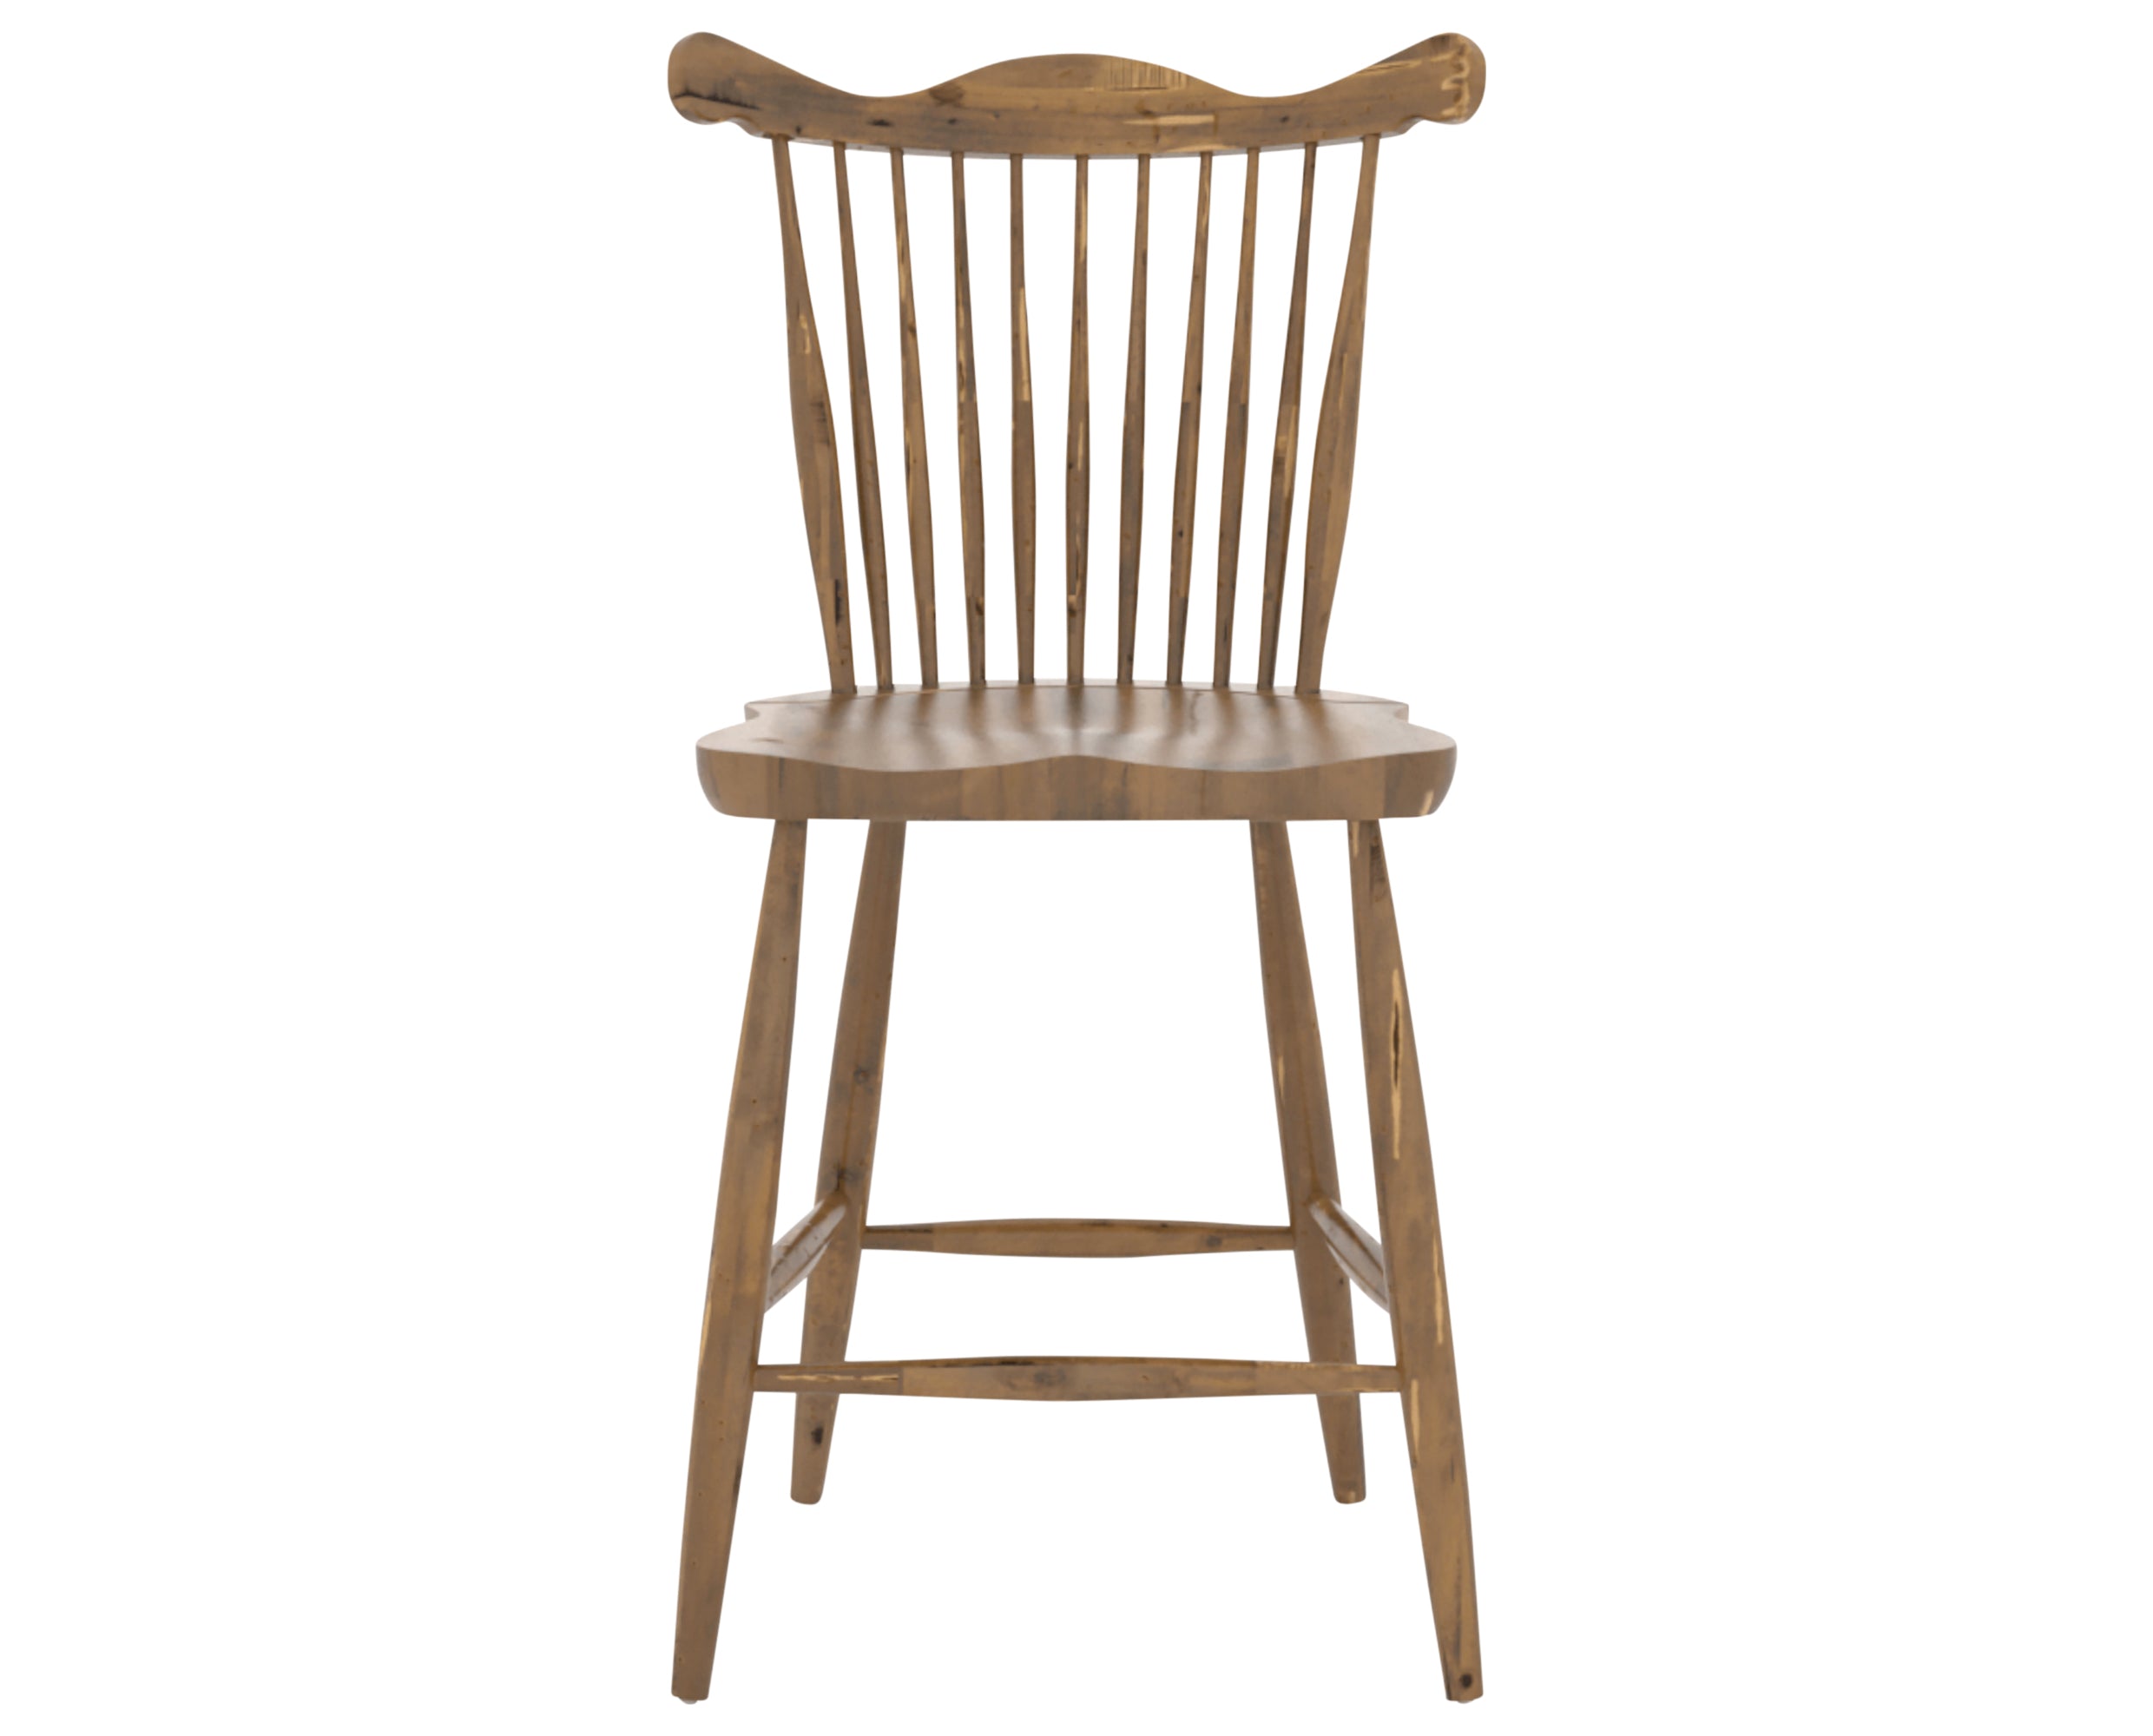 Oak Washed | Canadel Champlain Counter Stool 8162 | Valley Ridge Furniture